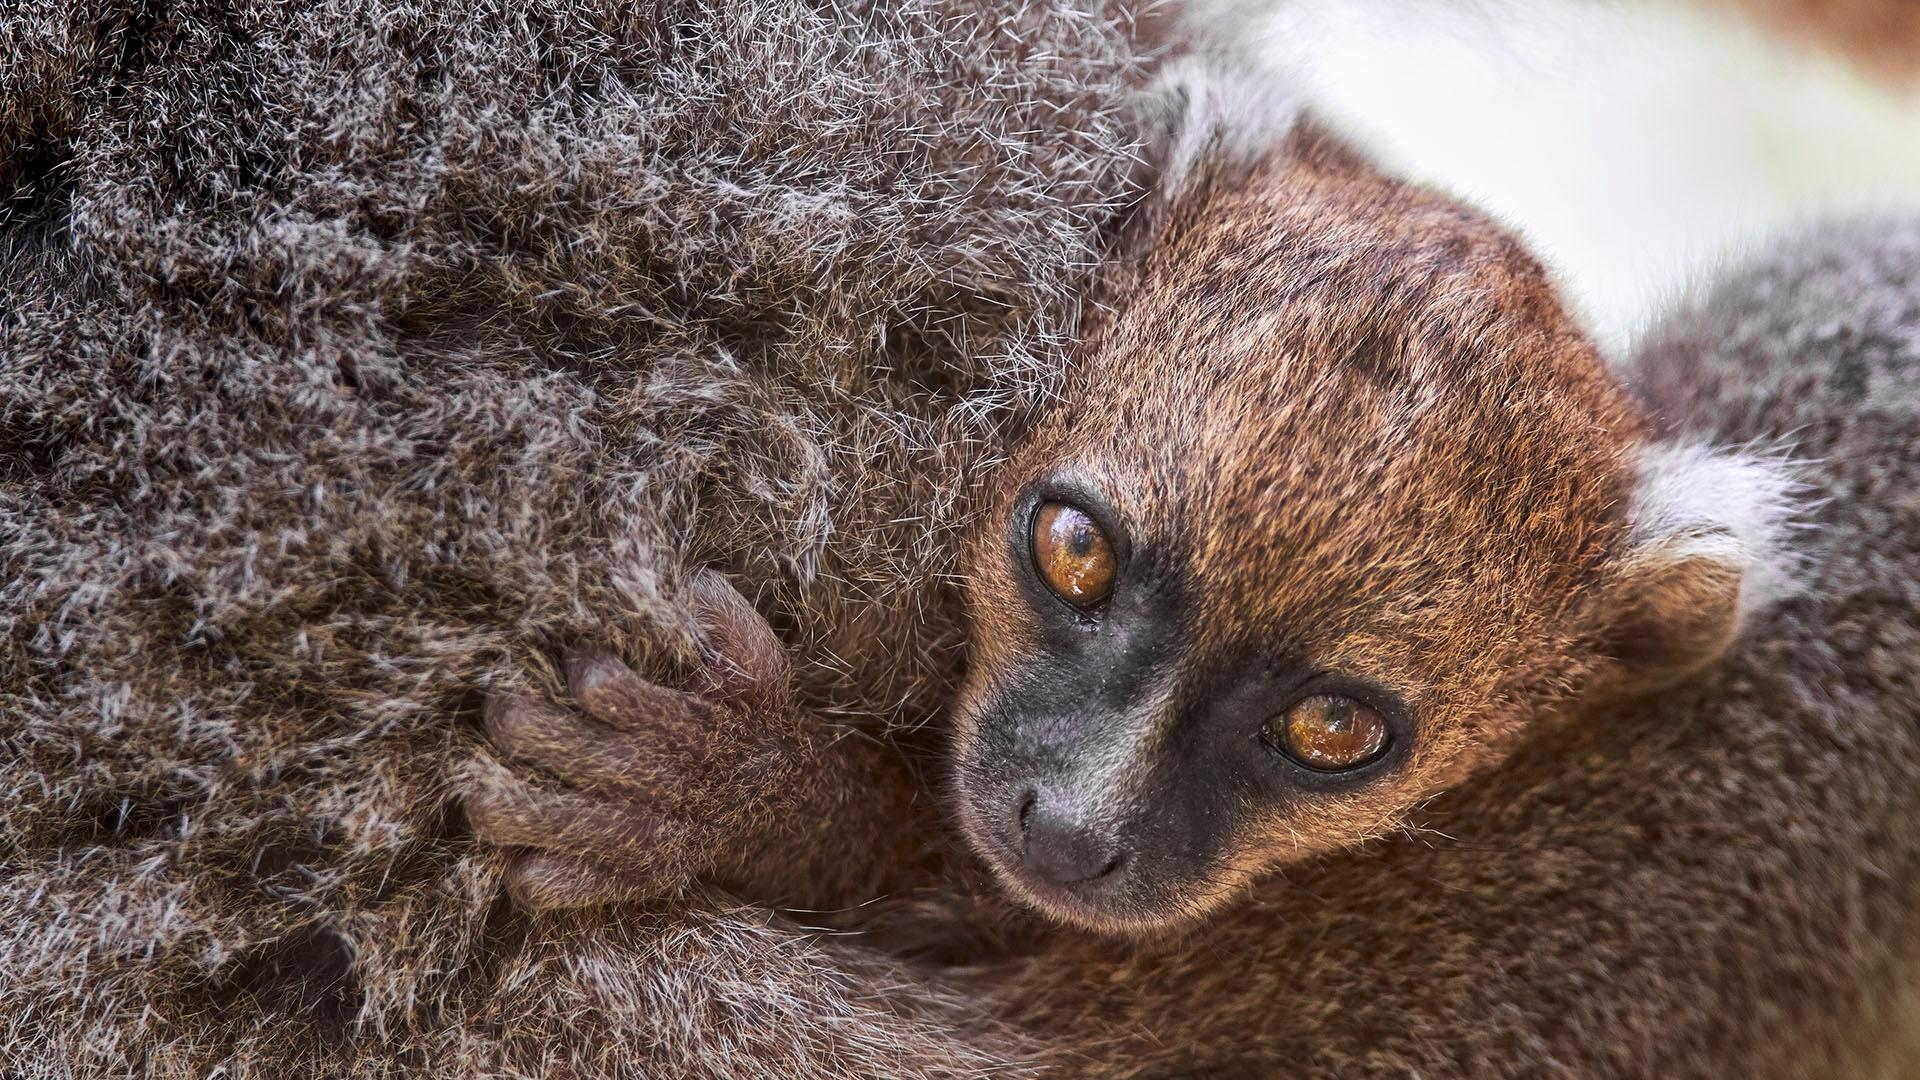 A young baby of the greater bamboo lemur.